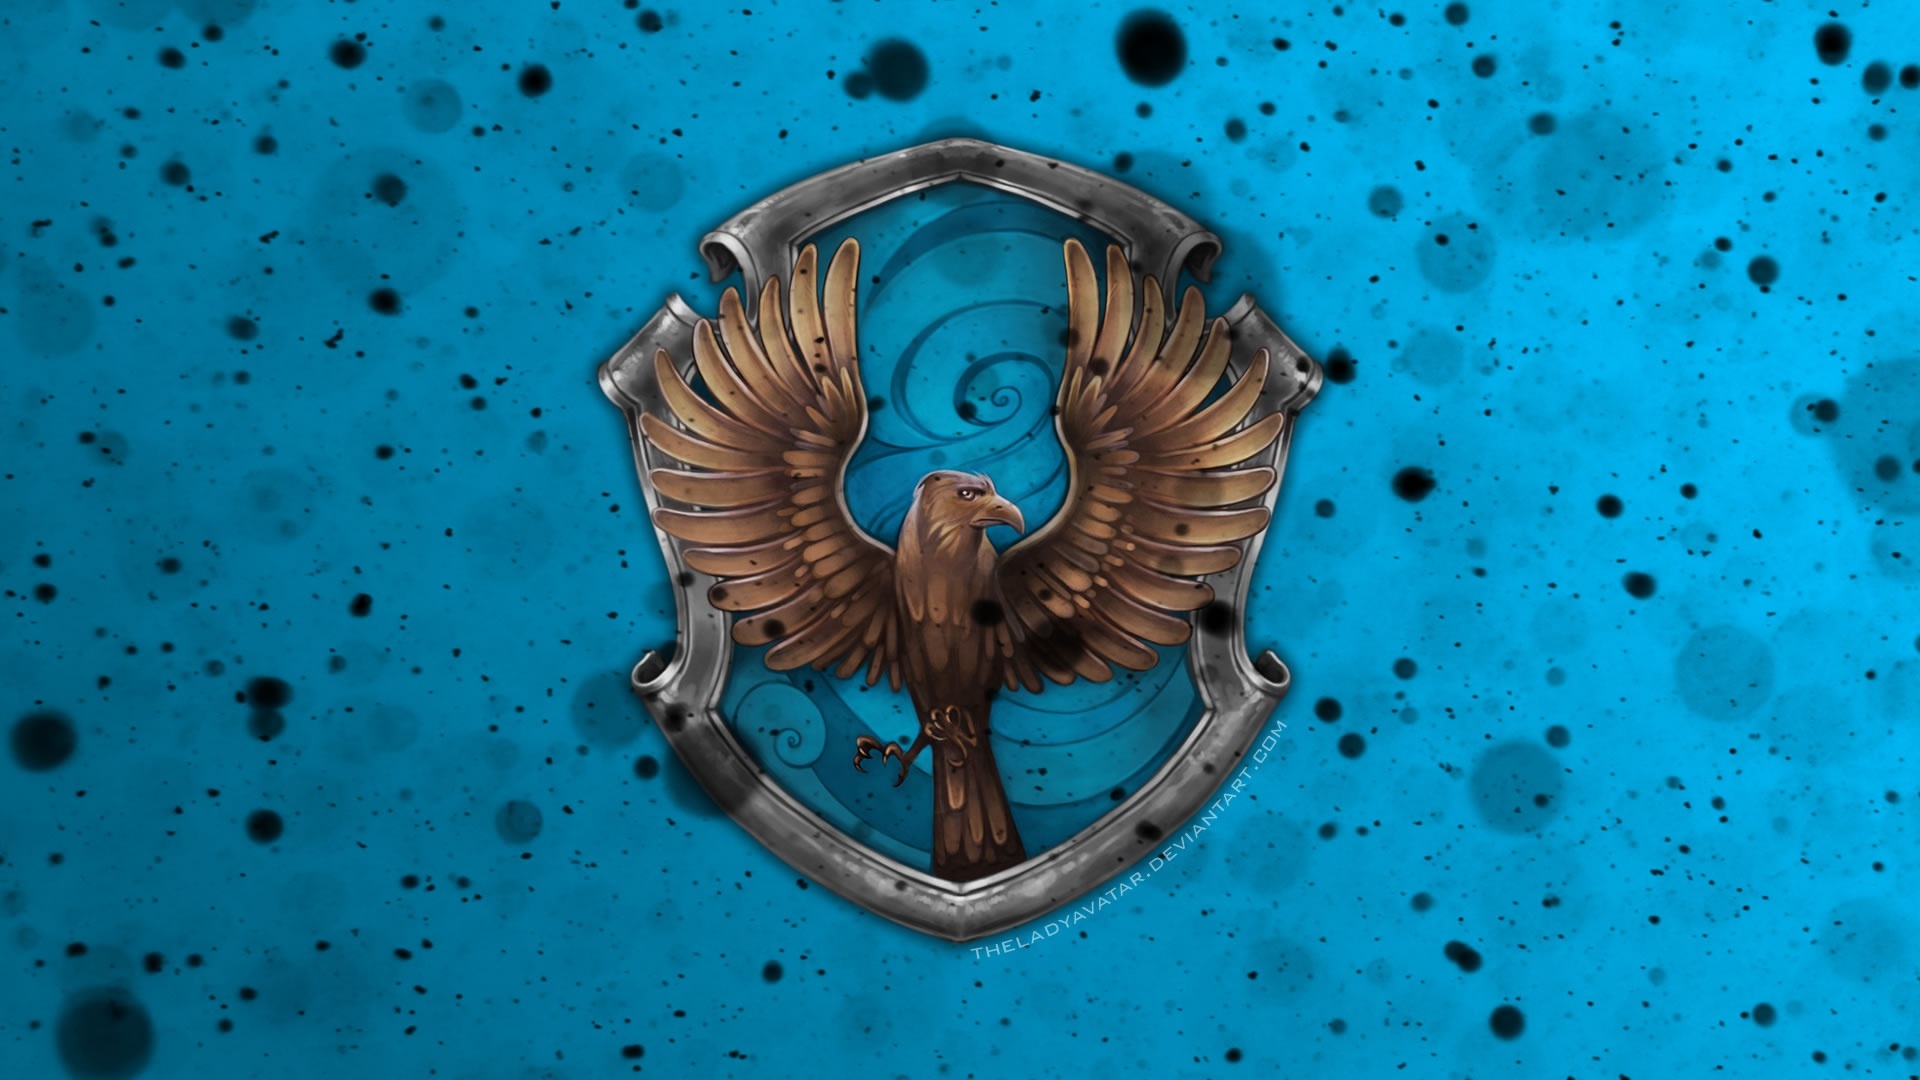 Eagle Harry Potter, Coat of arms, Hogwarts wallpapers, Ravenclaw section, 1920x1080 Full HD Desktop